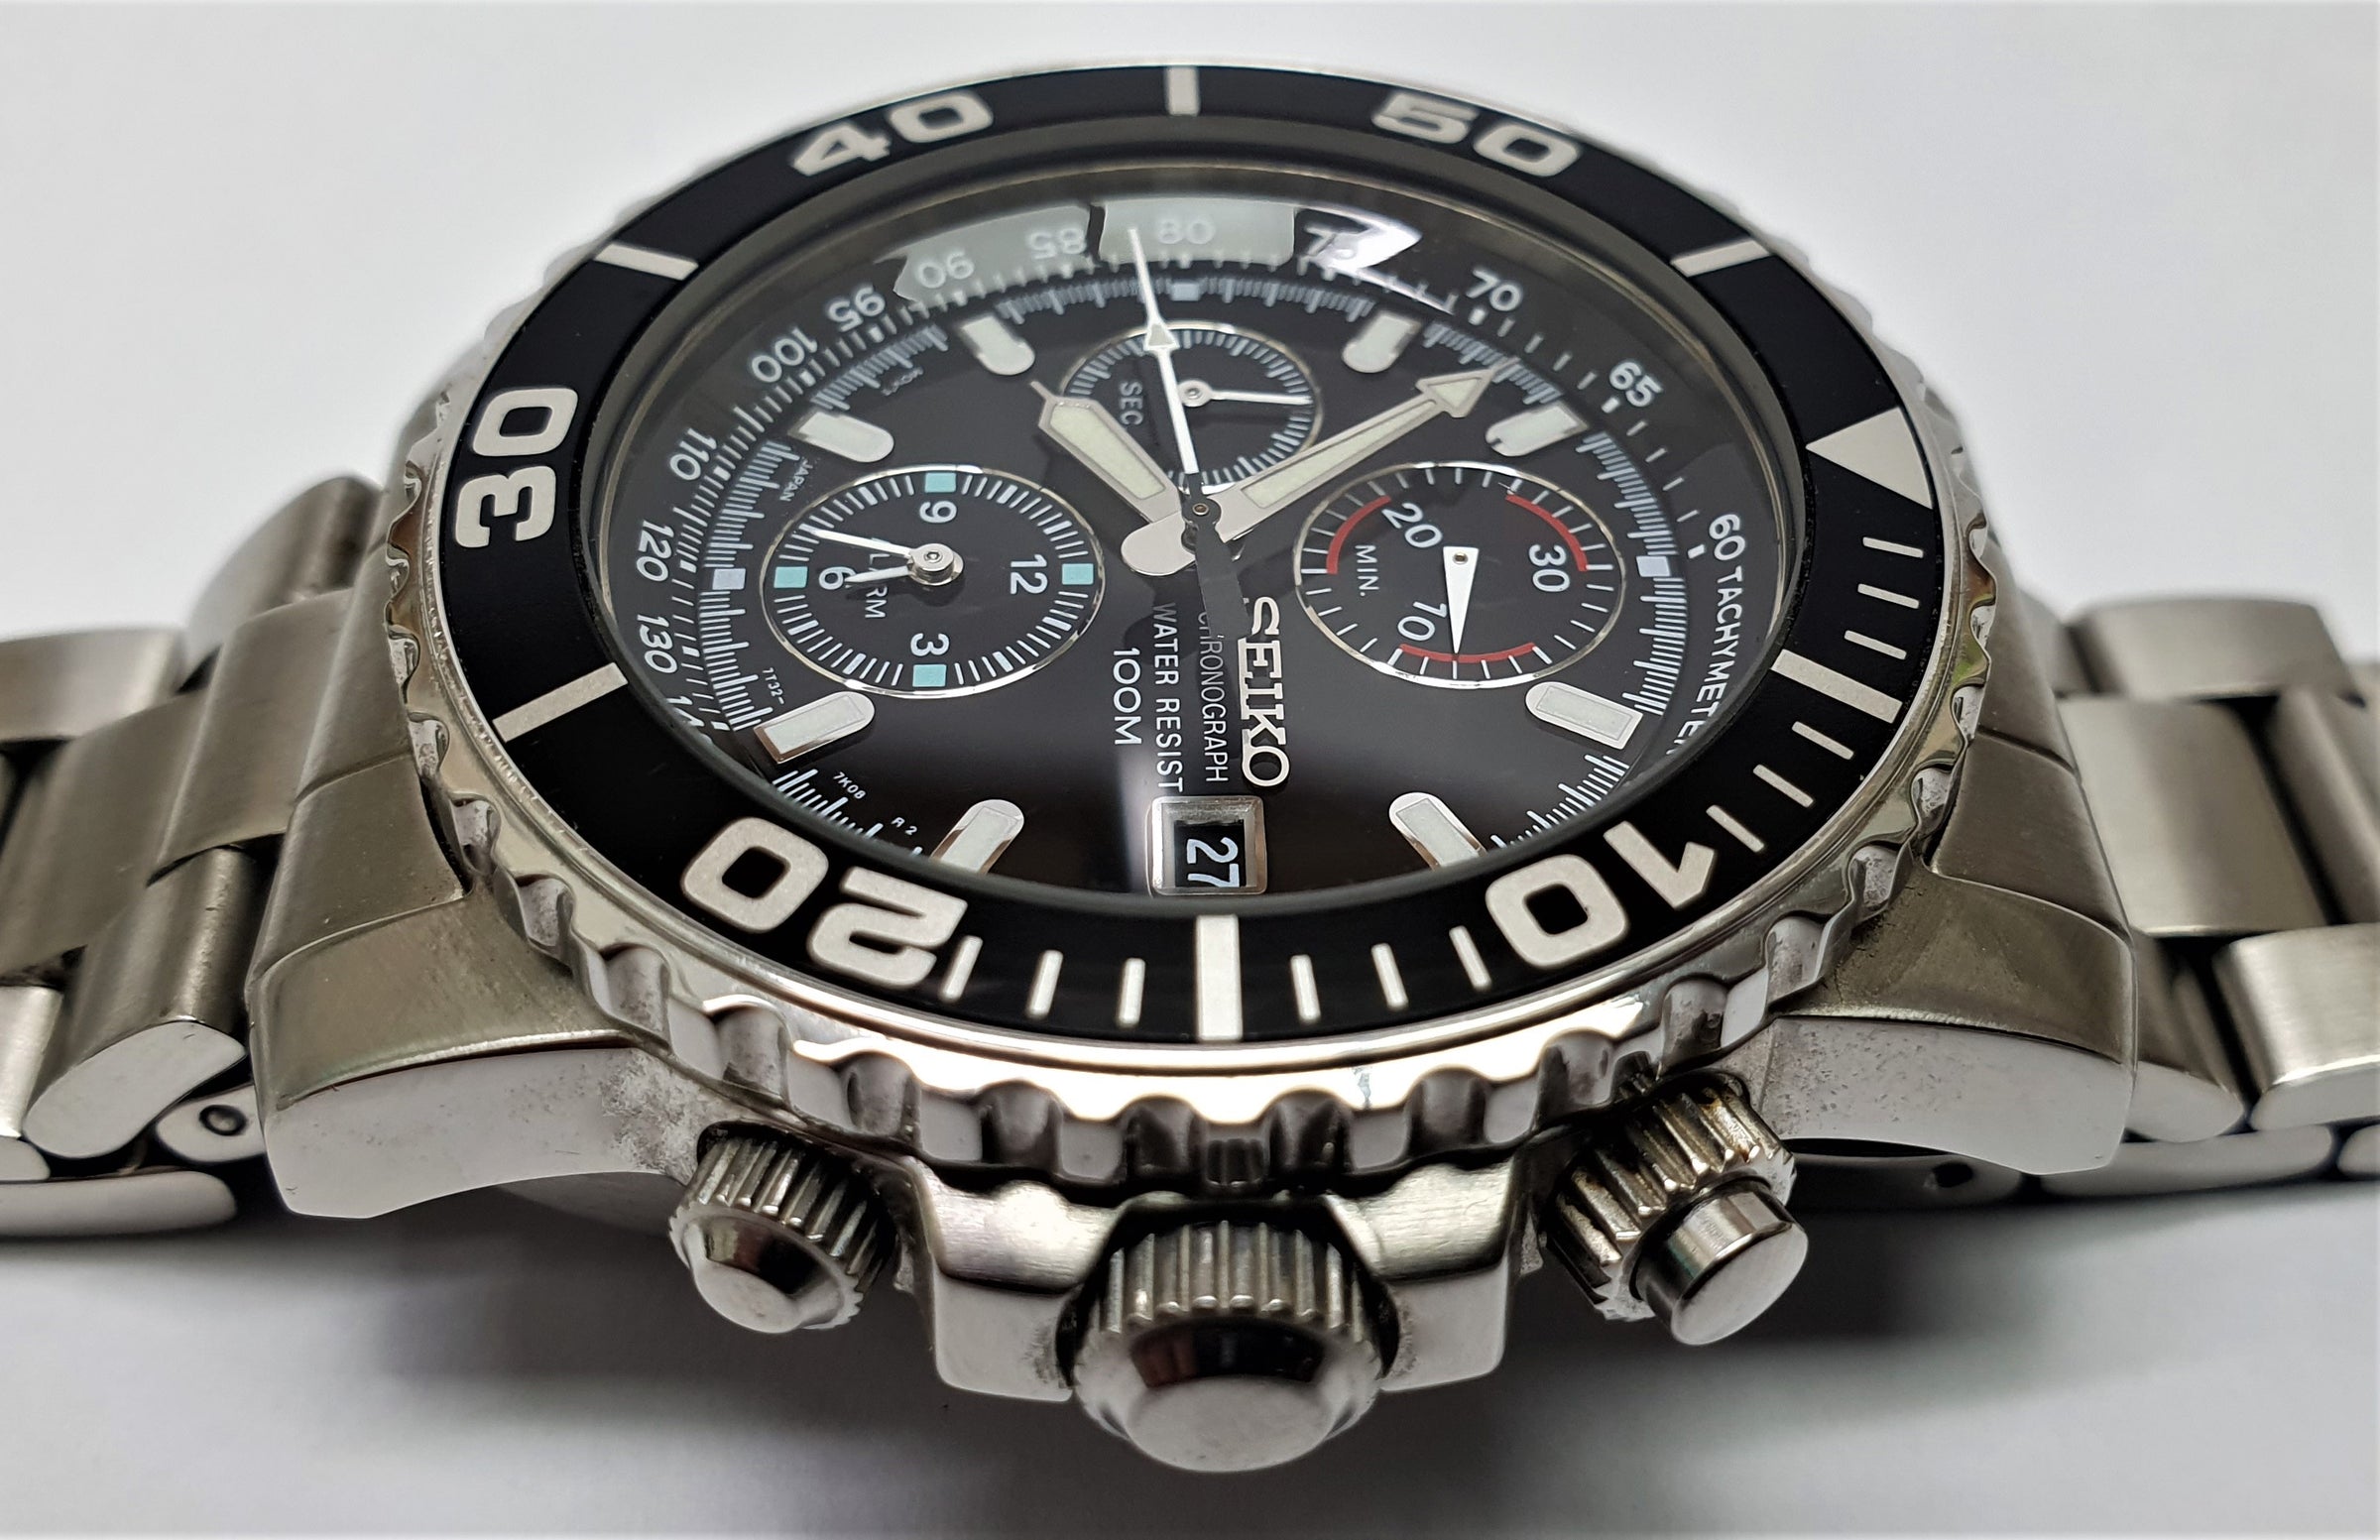 Sold Out Now - One more coming soon) SEIKO GEN-1 VINTAGE Seiko Quartz –  Watch Tomb Company Ltd